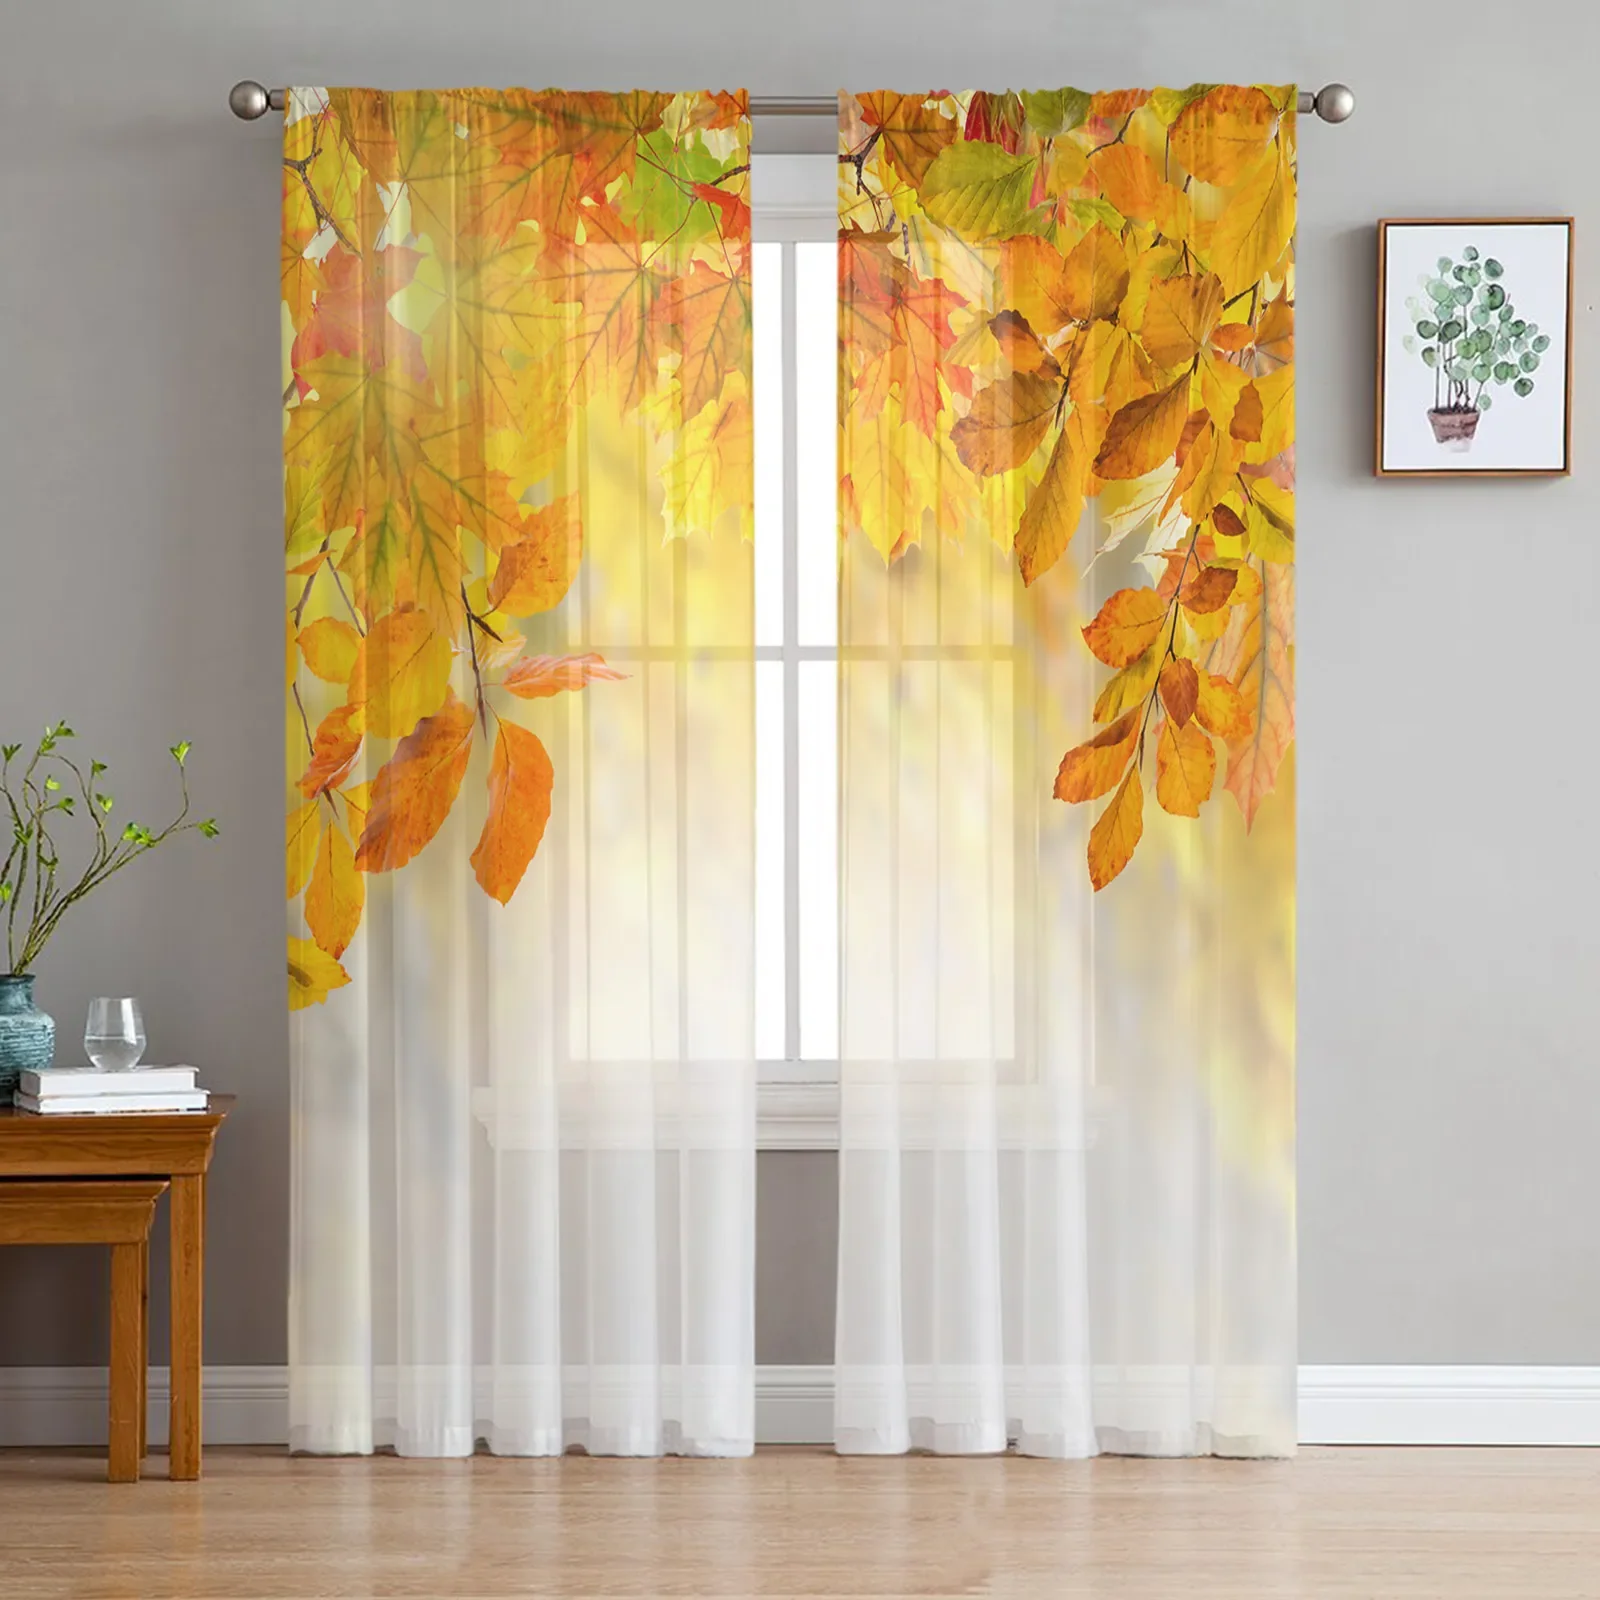 

Autumn Maple Leaves Trees Texture Tulle Sheer Curtains for Living Room Decor Window Curtain for Bedroom Voile Organza Drapes